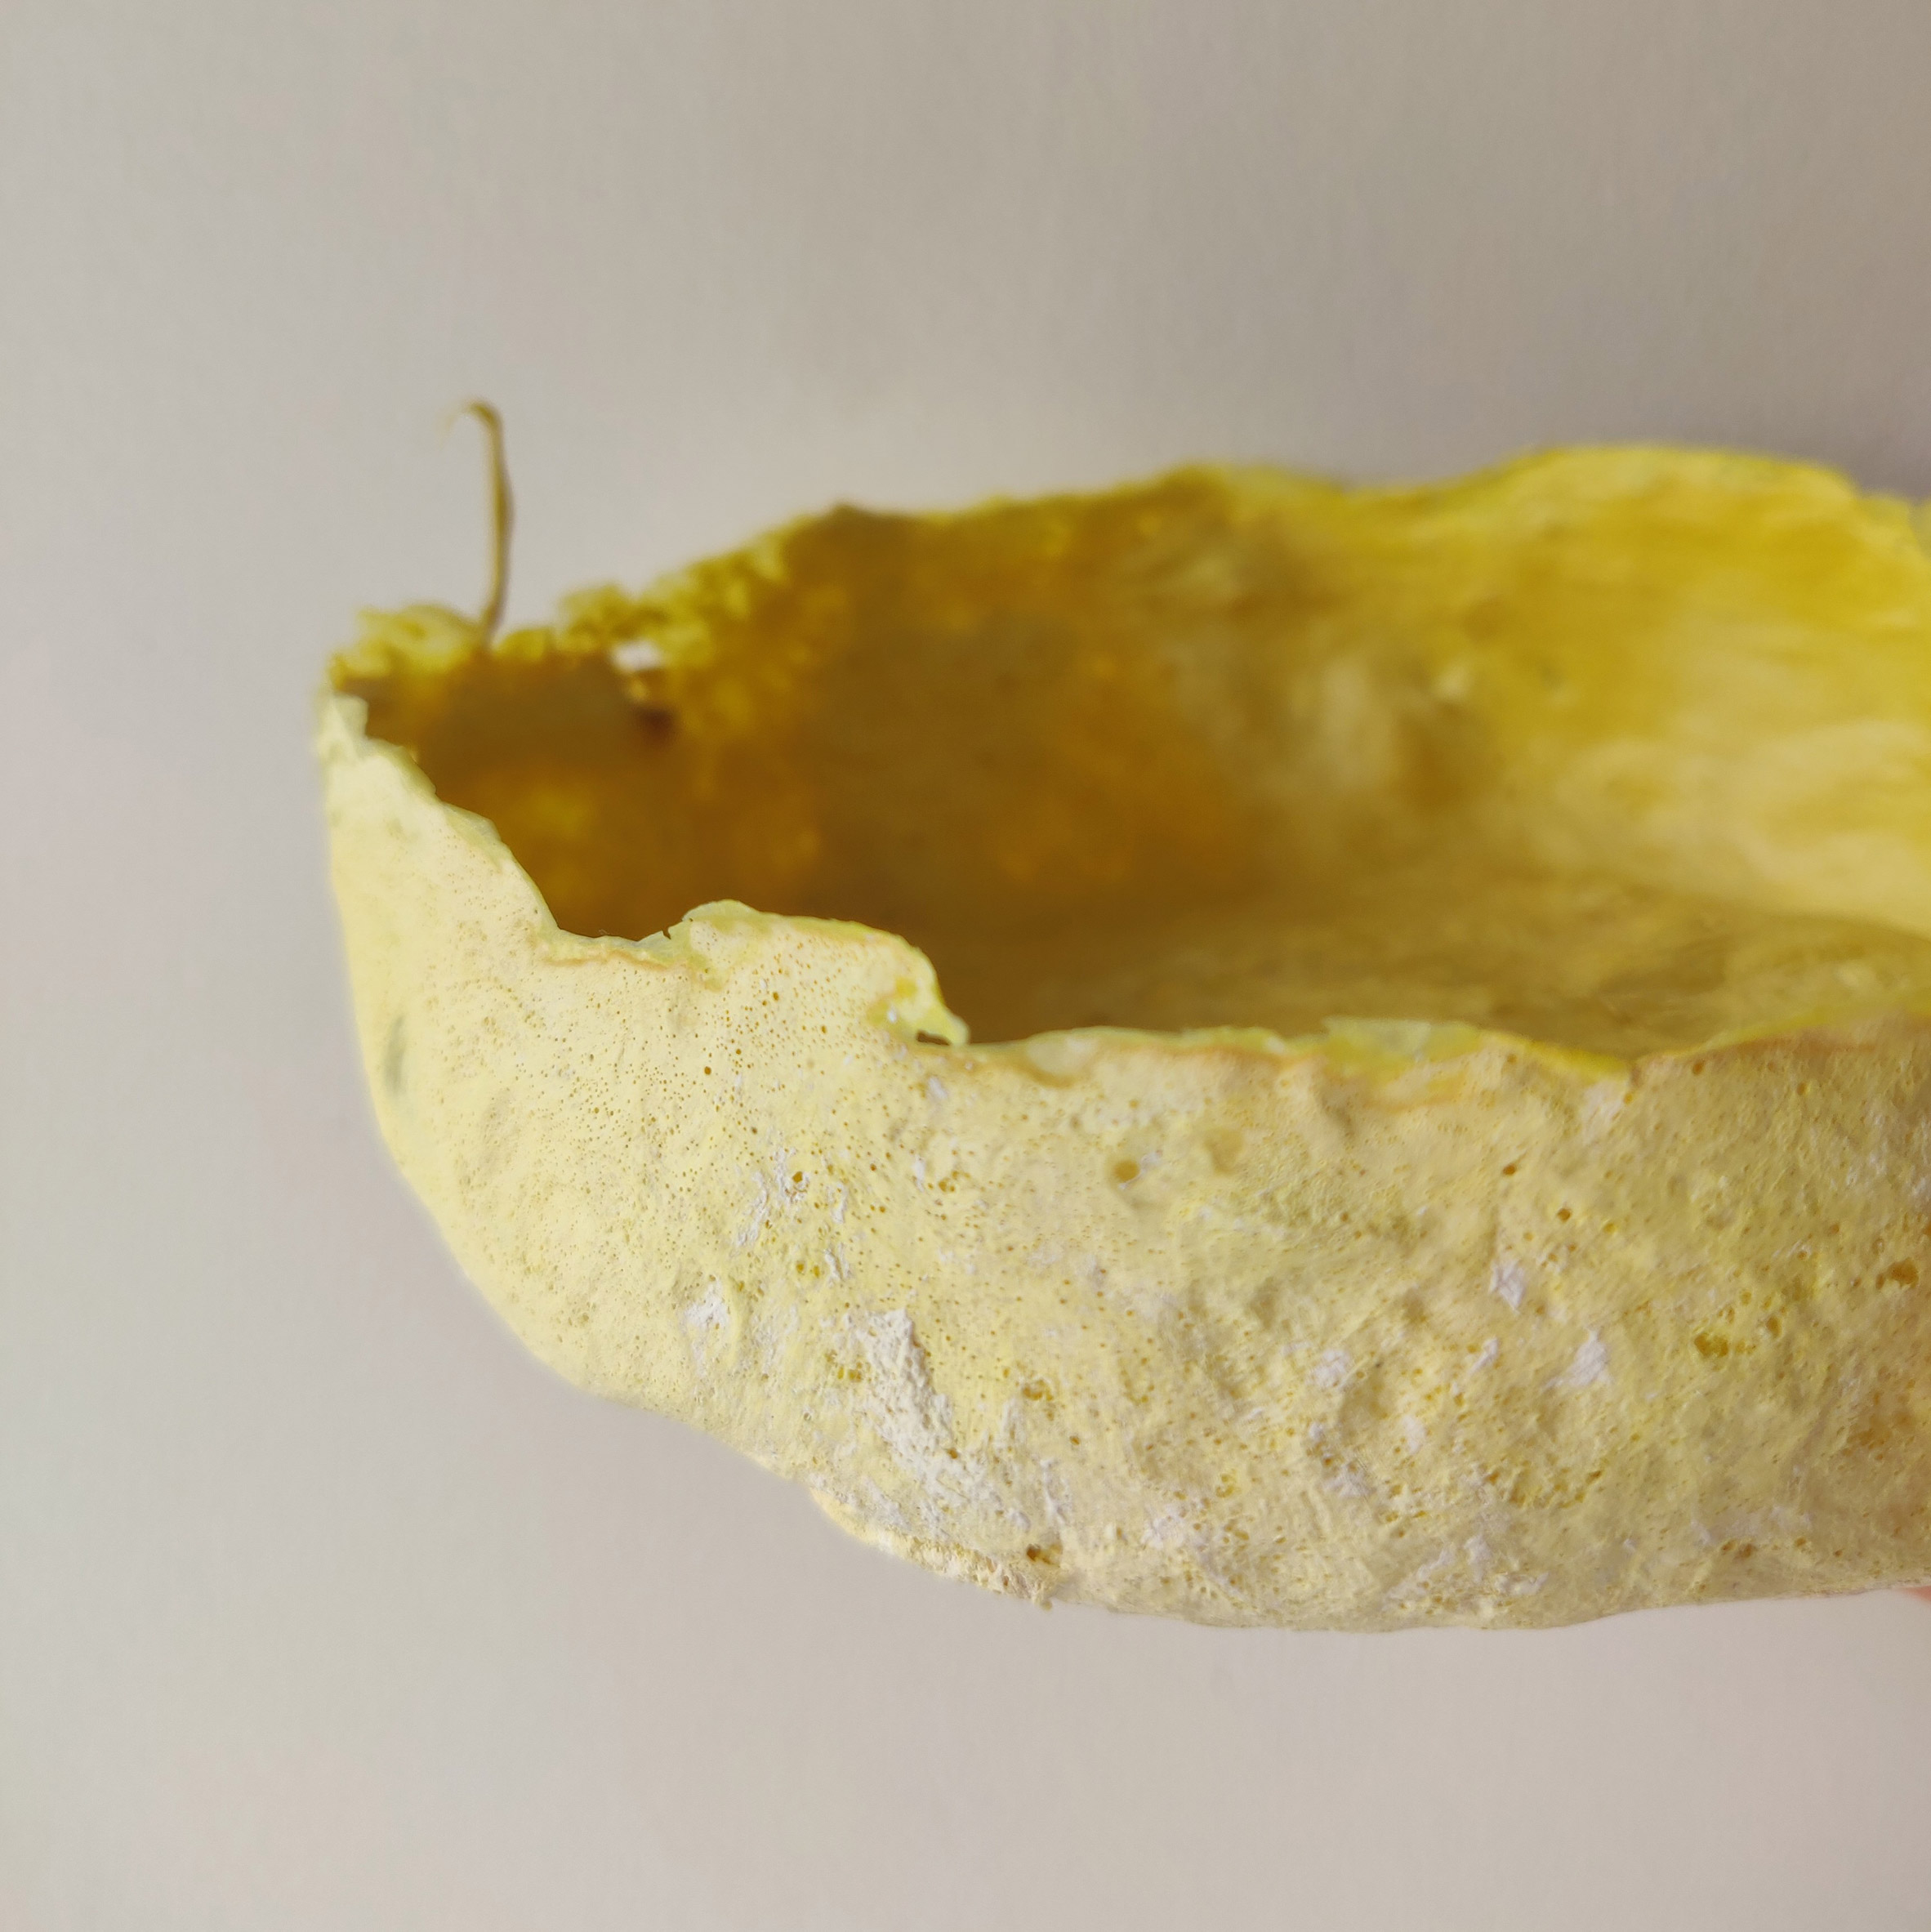 Yellow bowl from Sachi Tungare's Jugaad collection